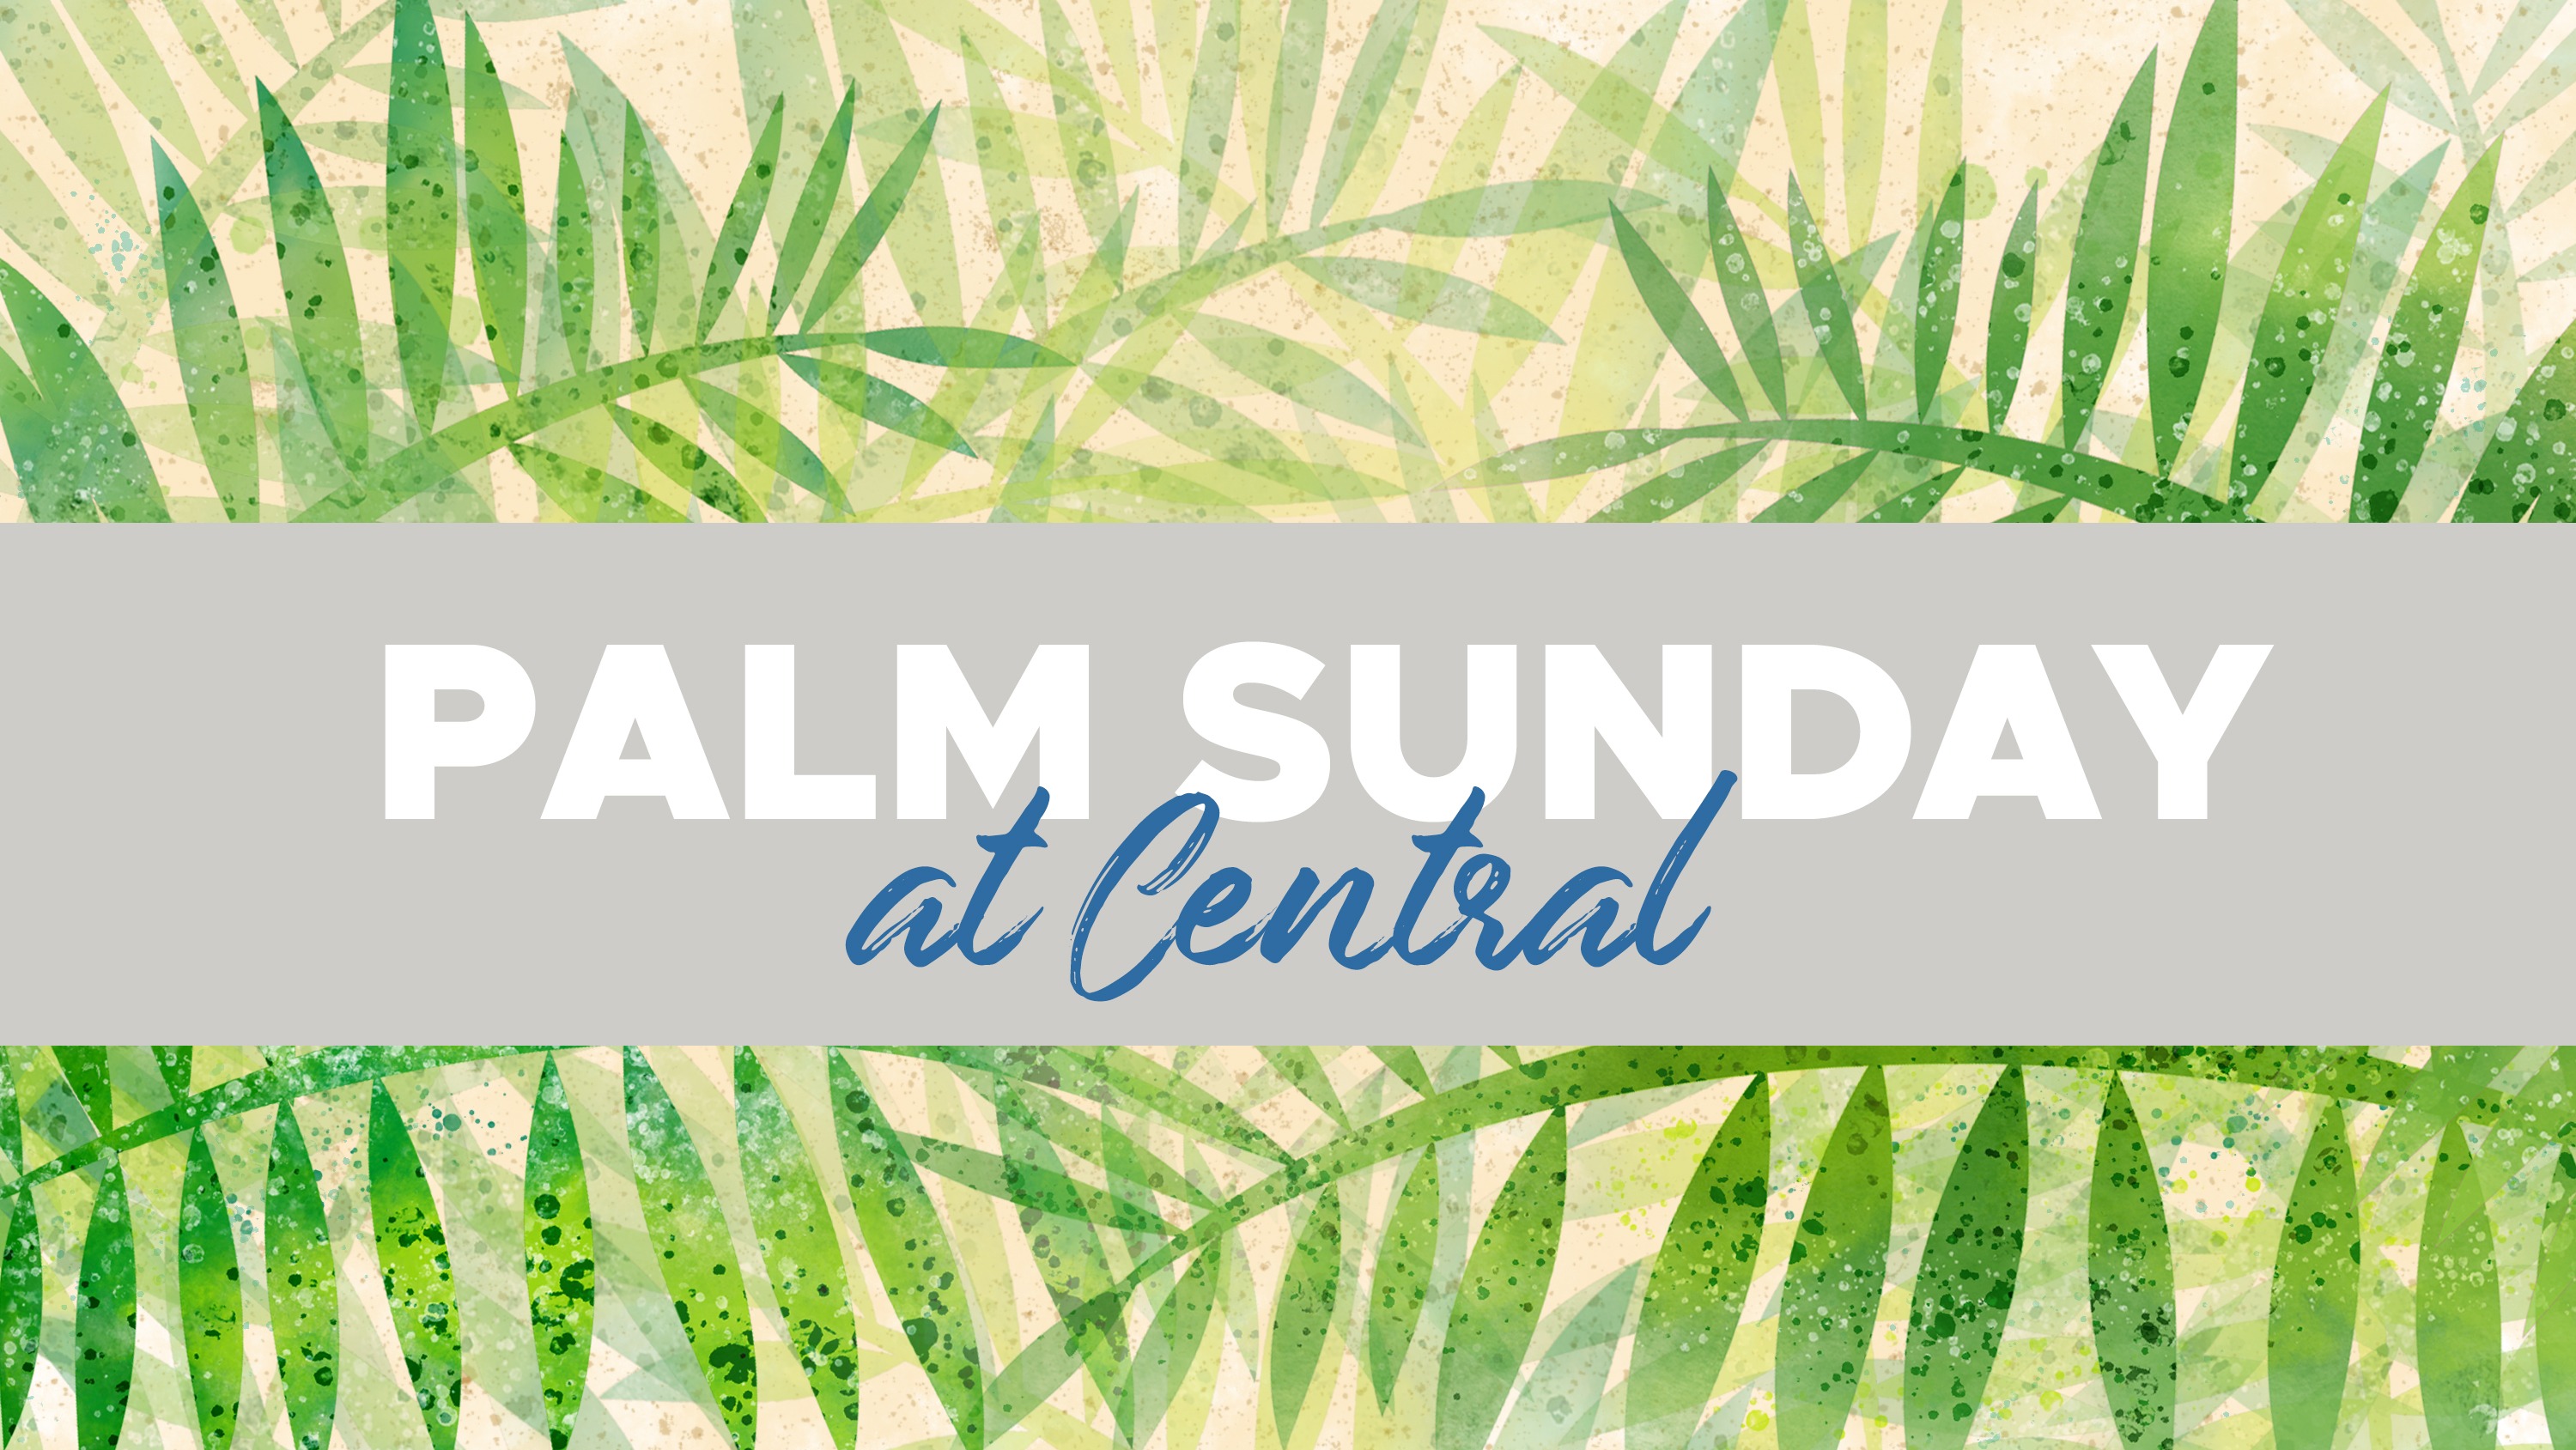 Palm Sunday 2019: History, Bible References, Wishes, Messages And More